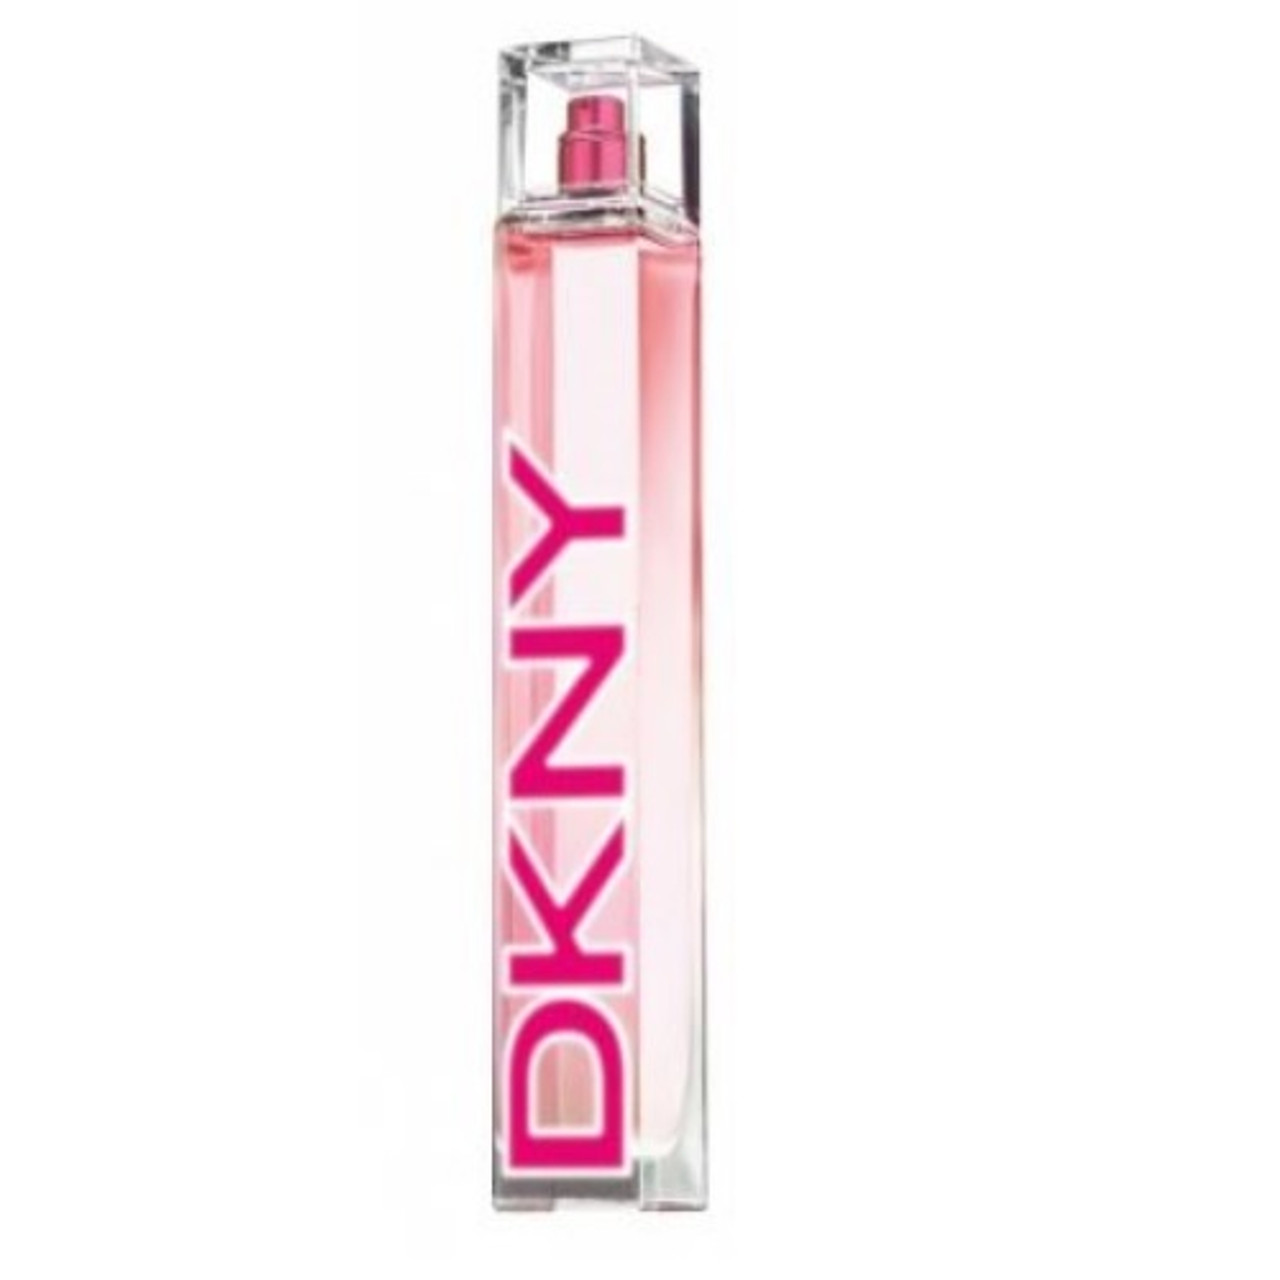 DKNY Energizing by Donna Karan 3.4 oz EDP Perfume for Women New In Box